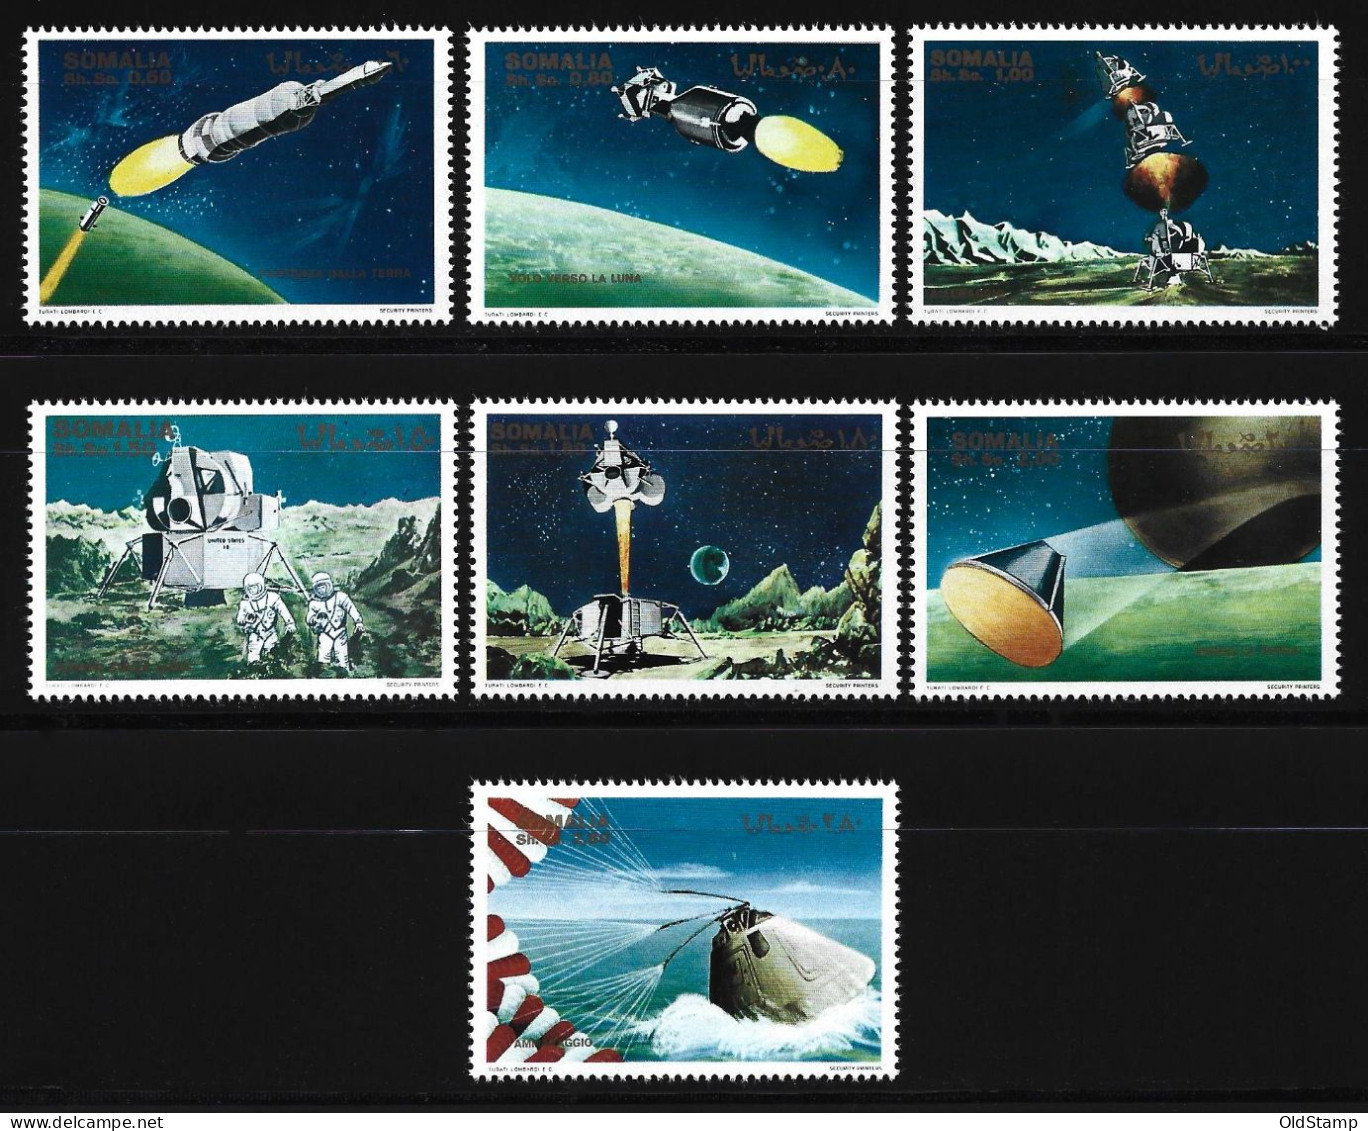 Somalia SPACE SPACESHIP PLANET ASTRONAUT STAR MNH LUXE Africa Stamps FULL SET - Colecciones